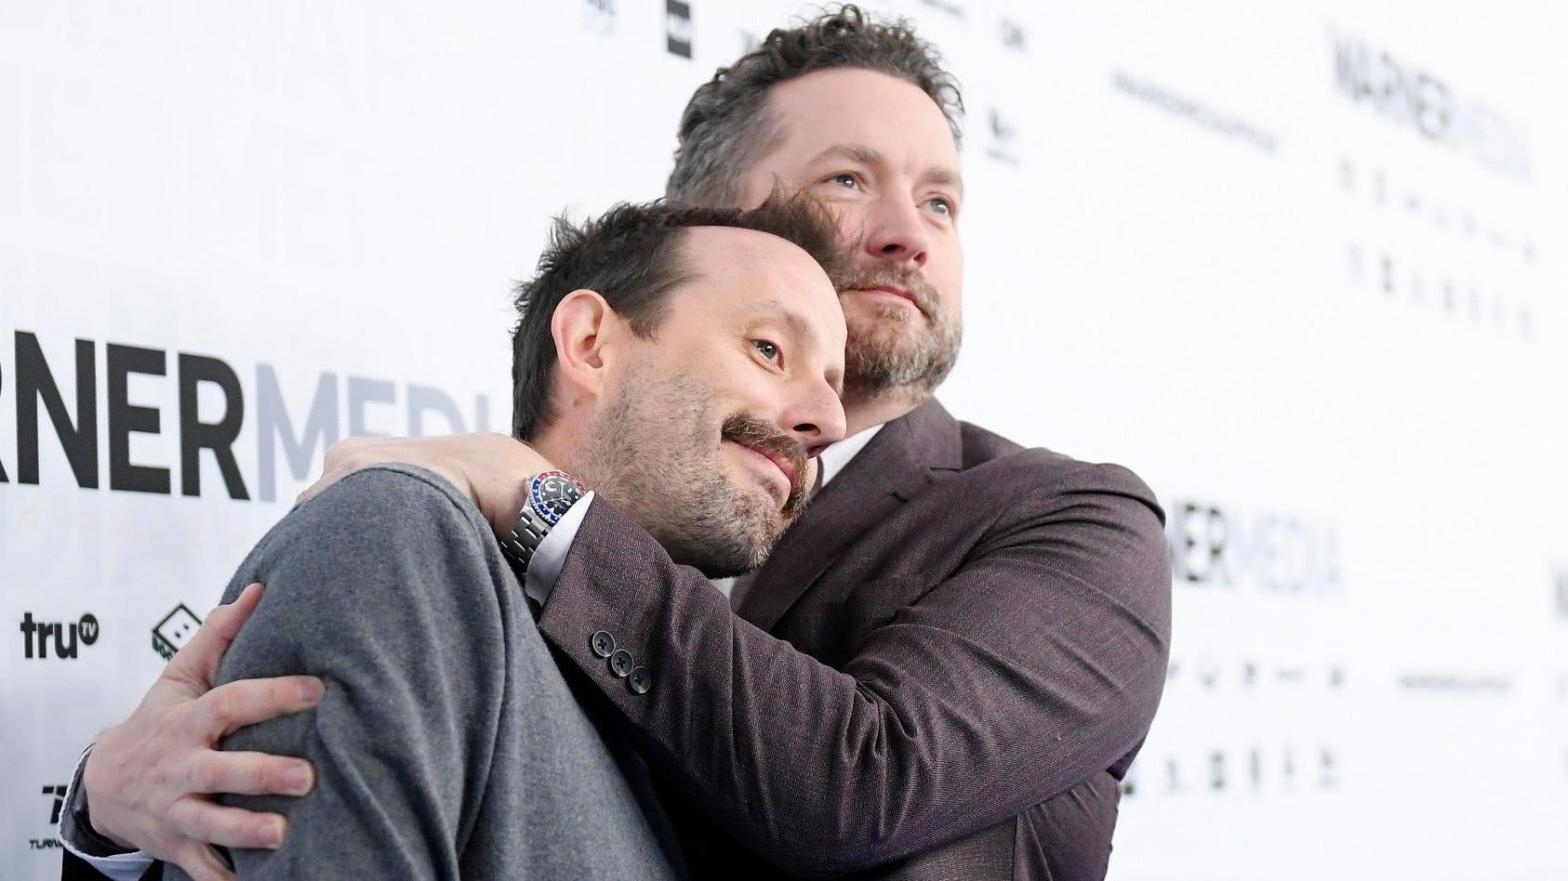 Rooster Teeth co-founders Burnie Burns and Geoff Ramsey attend a Warner Bros. event in 2019. (Photo: Mike Coppola, Getty Images)